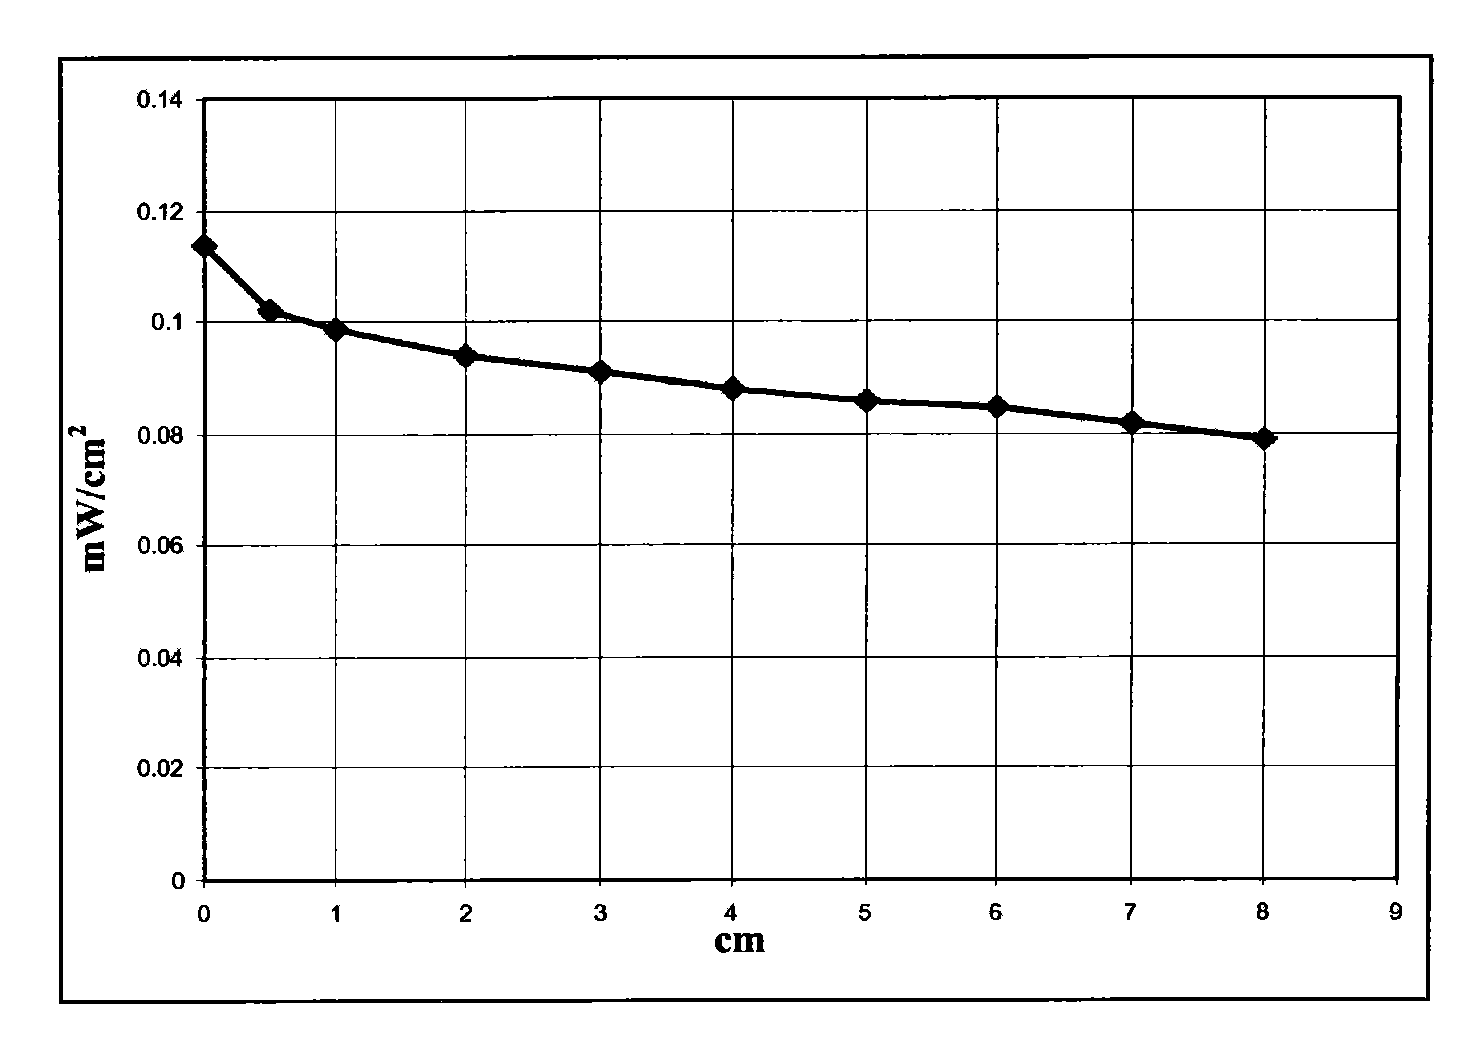 Luminescent solar concentrator comprising disubstituted benzoselenadiazole compounds